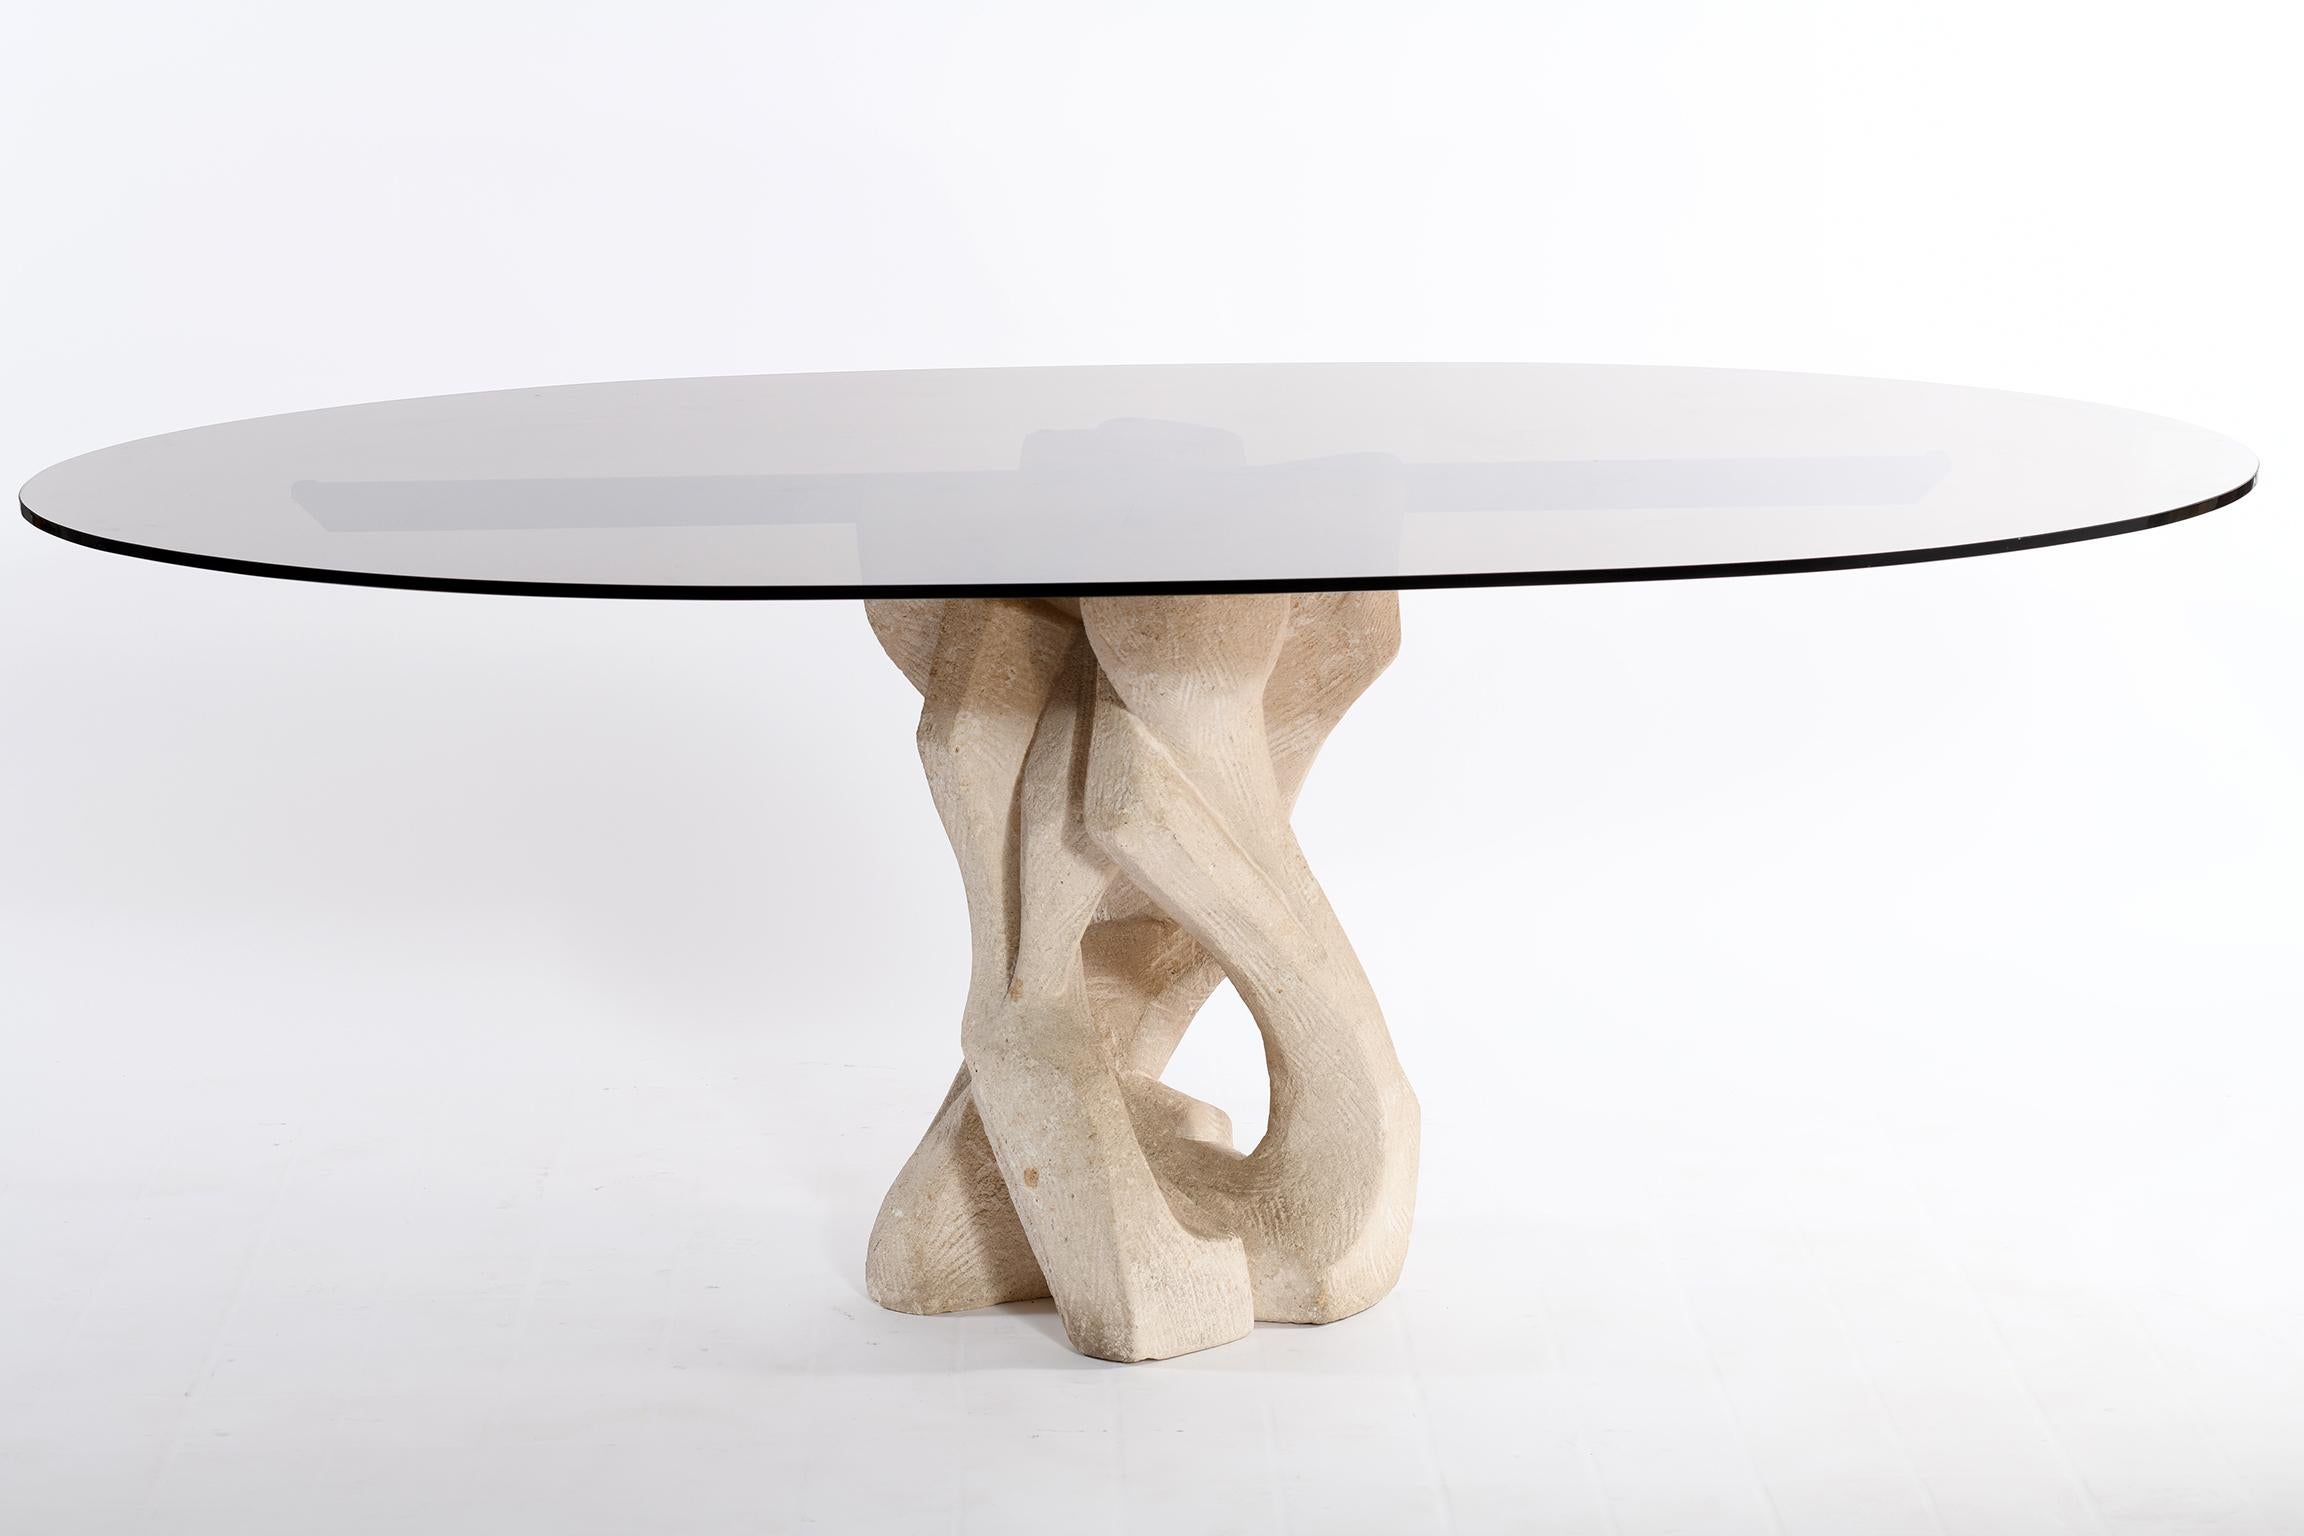 Dining table or center table, large console with oval top in thick smoked glass resting on an abstract Brutalist sculptural base in stone agglomerated, in the upper part the sculpture base we find a bronzed brass bar that helps support the large top